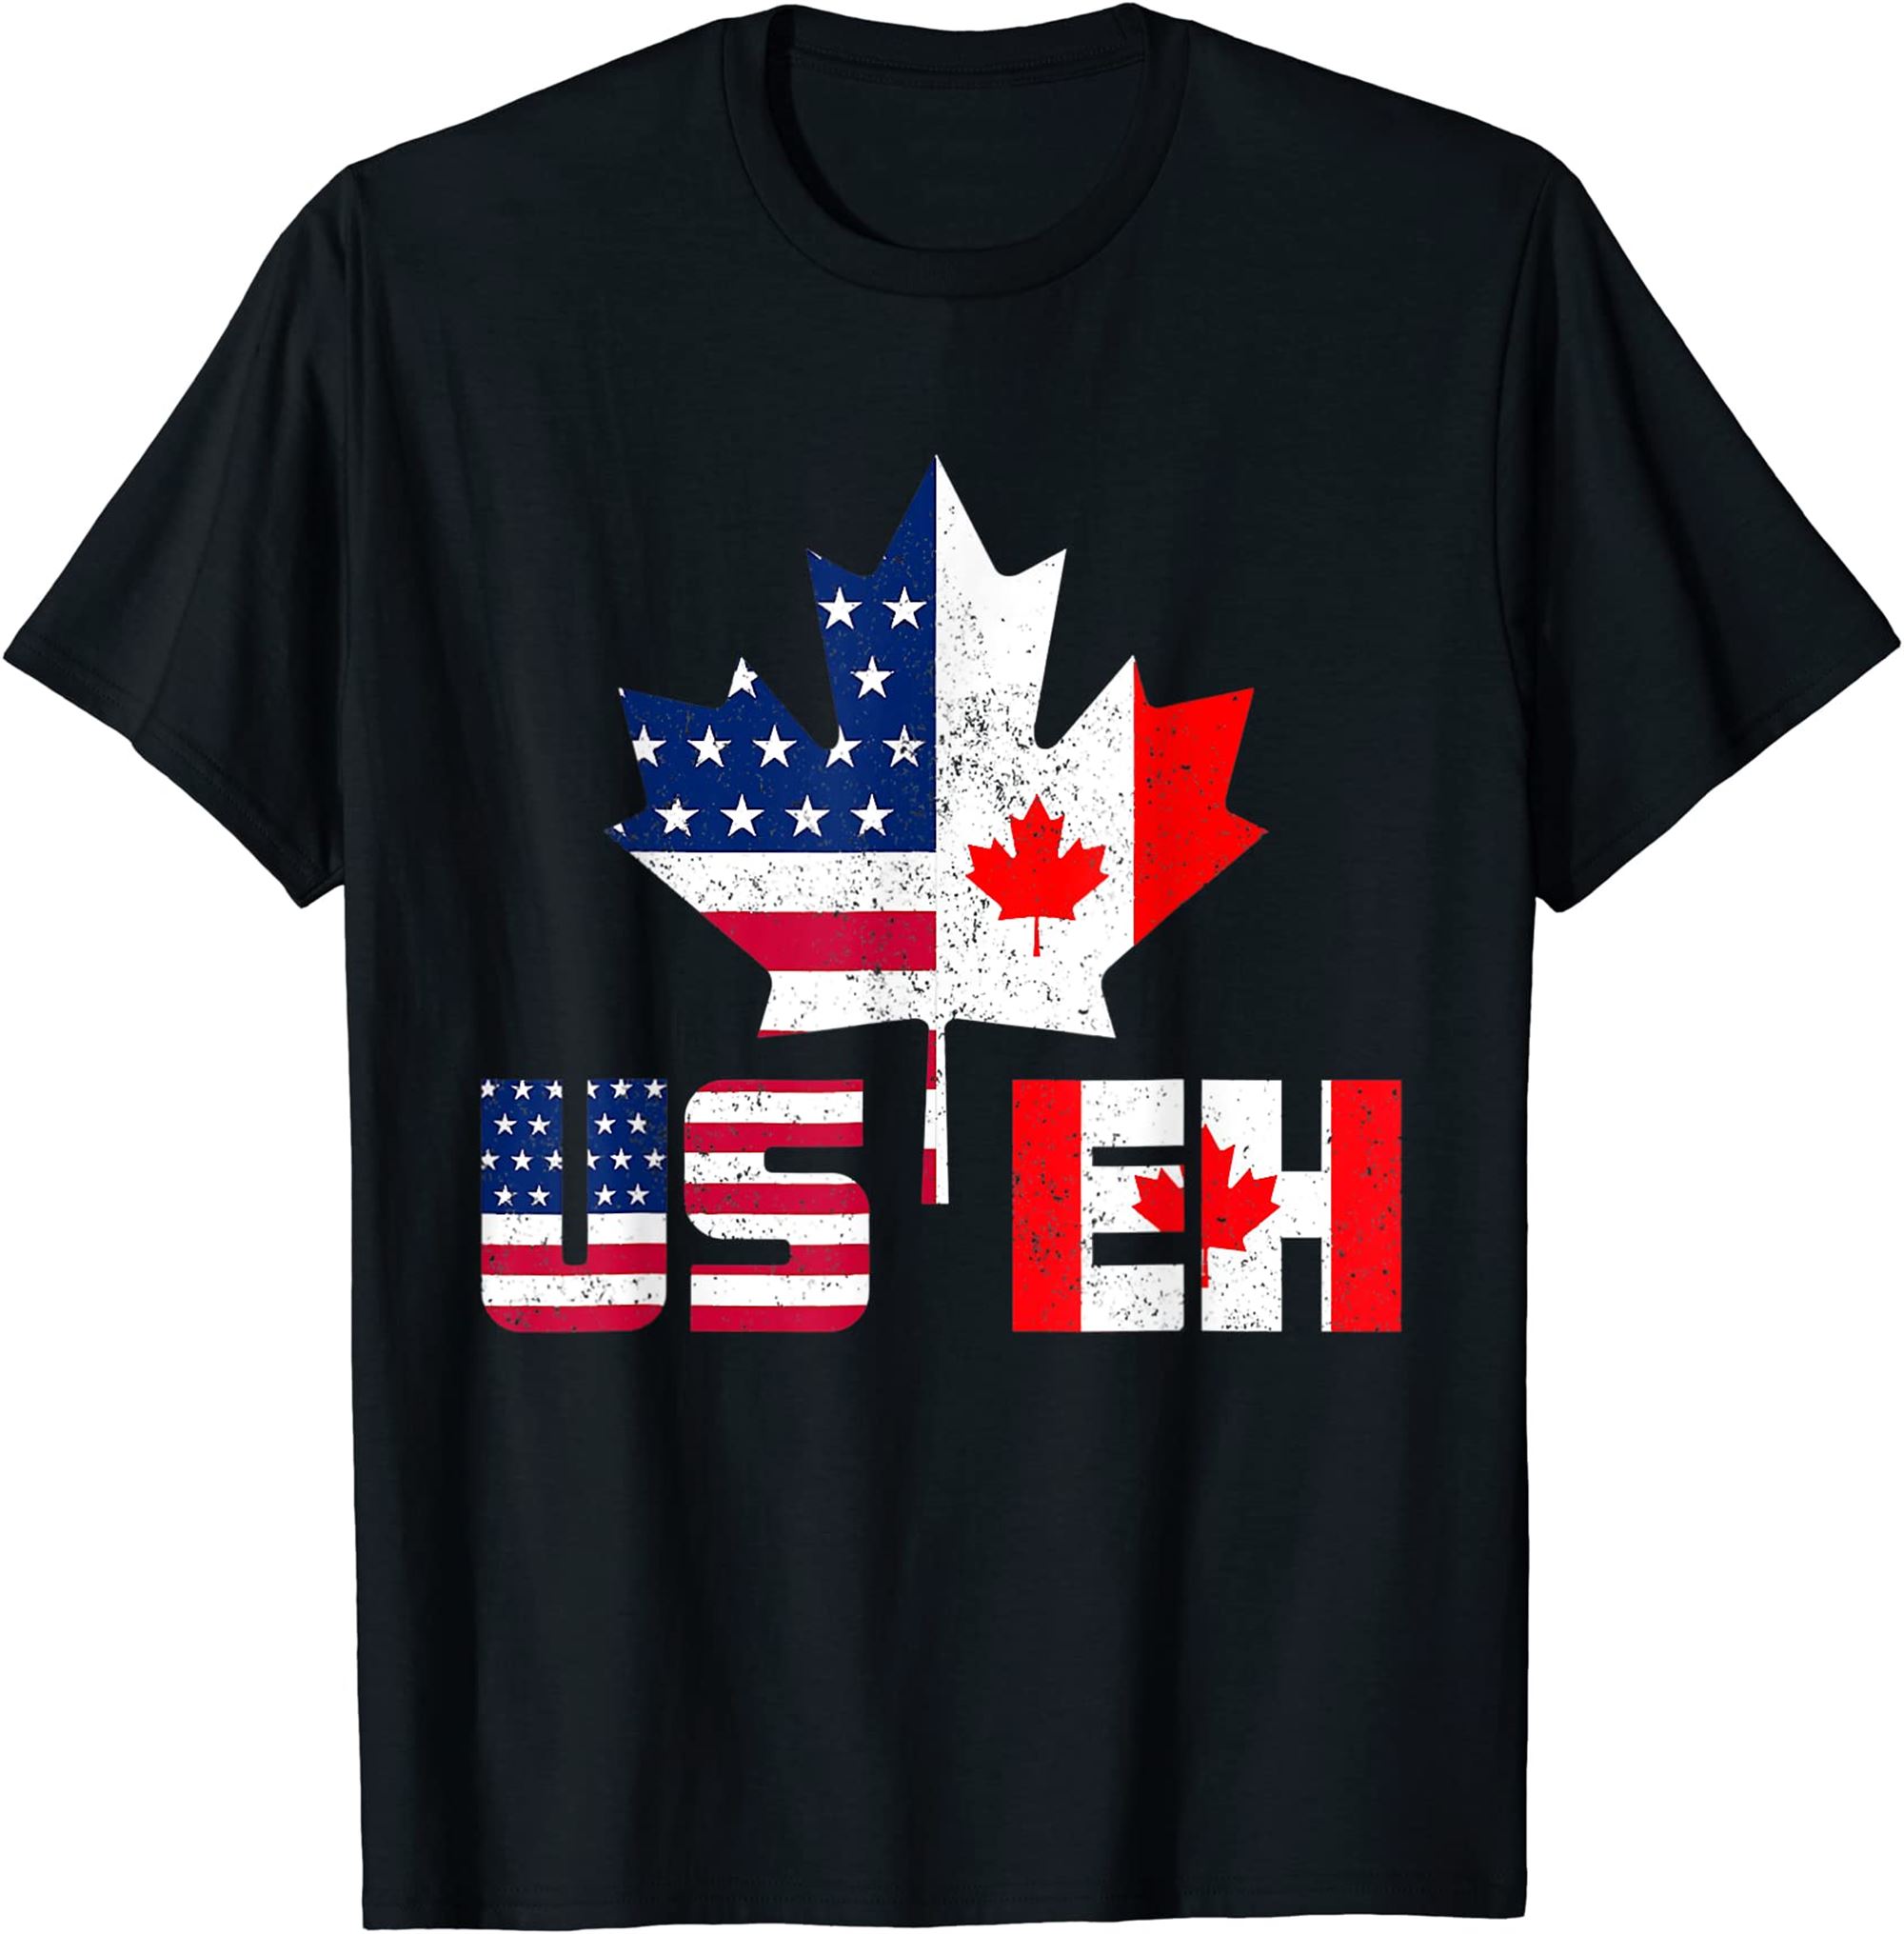 Happy Canada Day Shirt Usa Pride Us Flag Day Useh Canadian T-shirt Full Size Up To 5xl